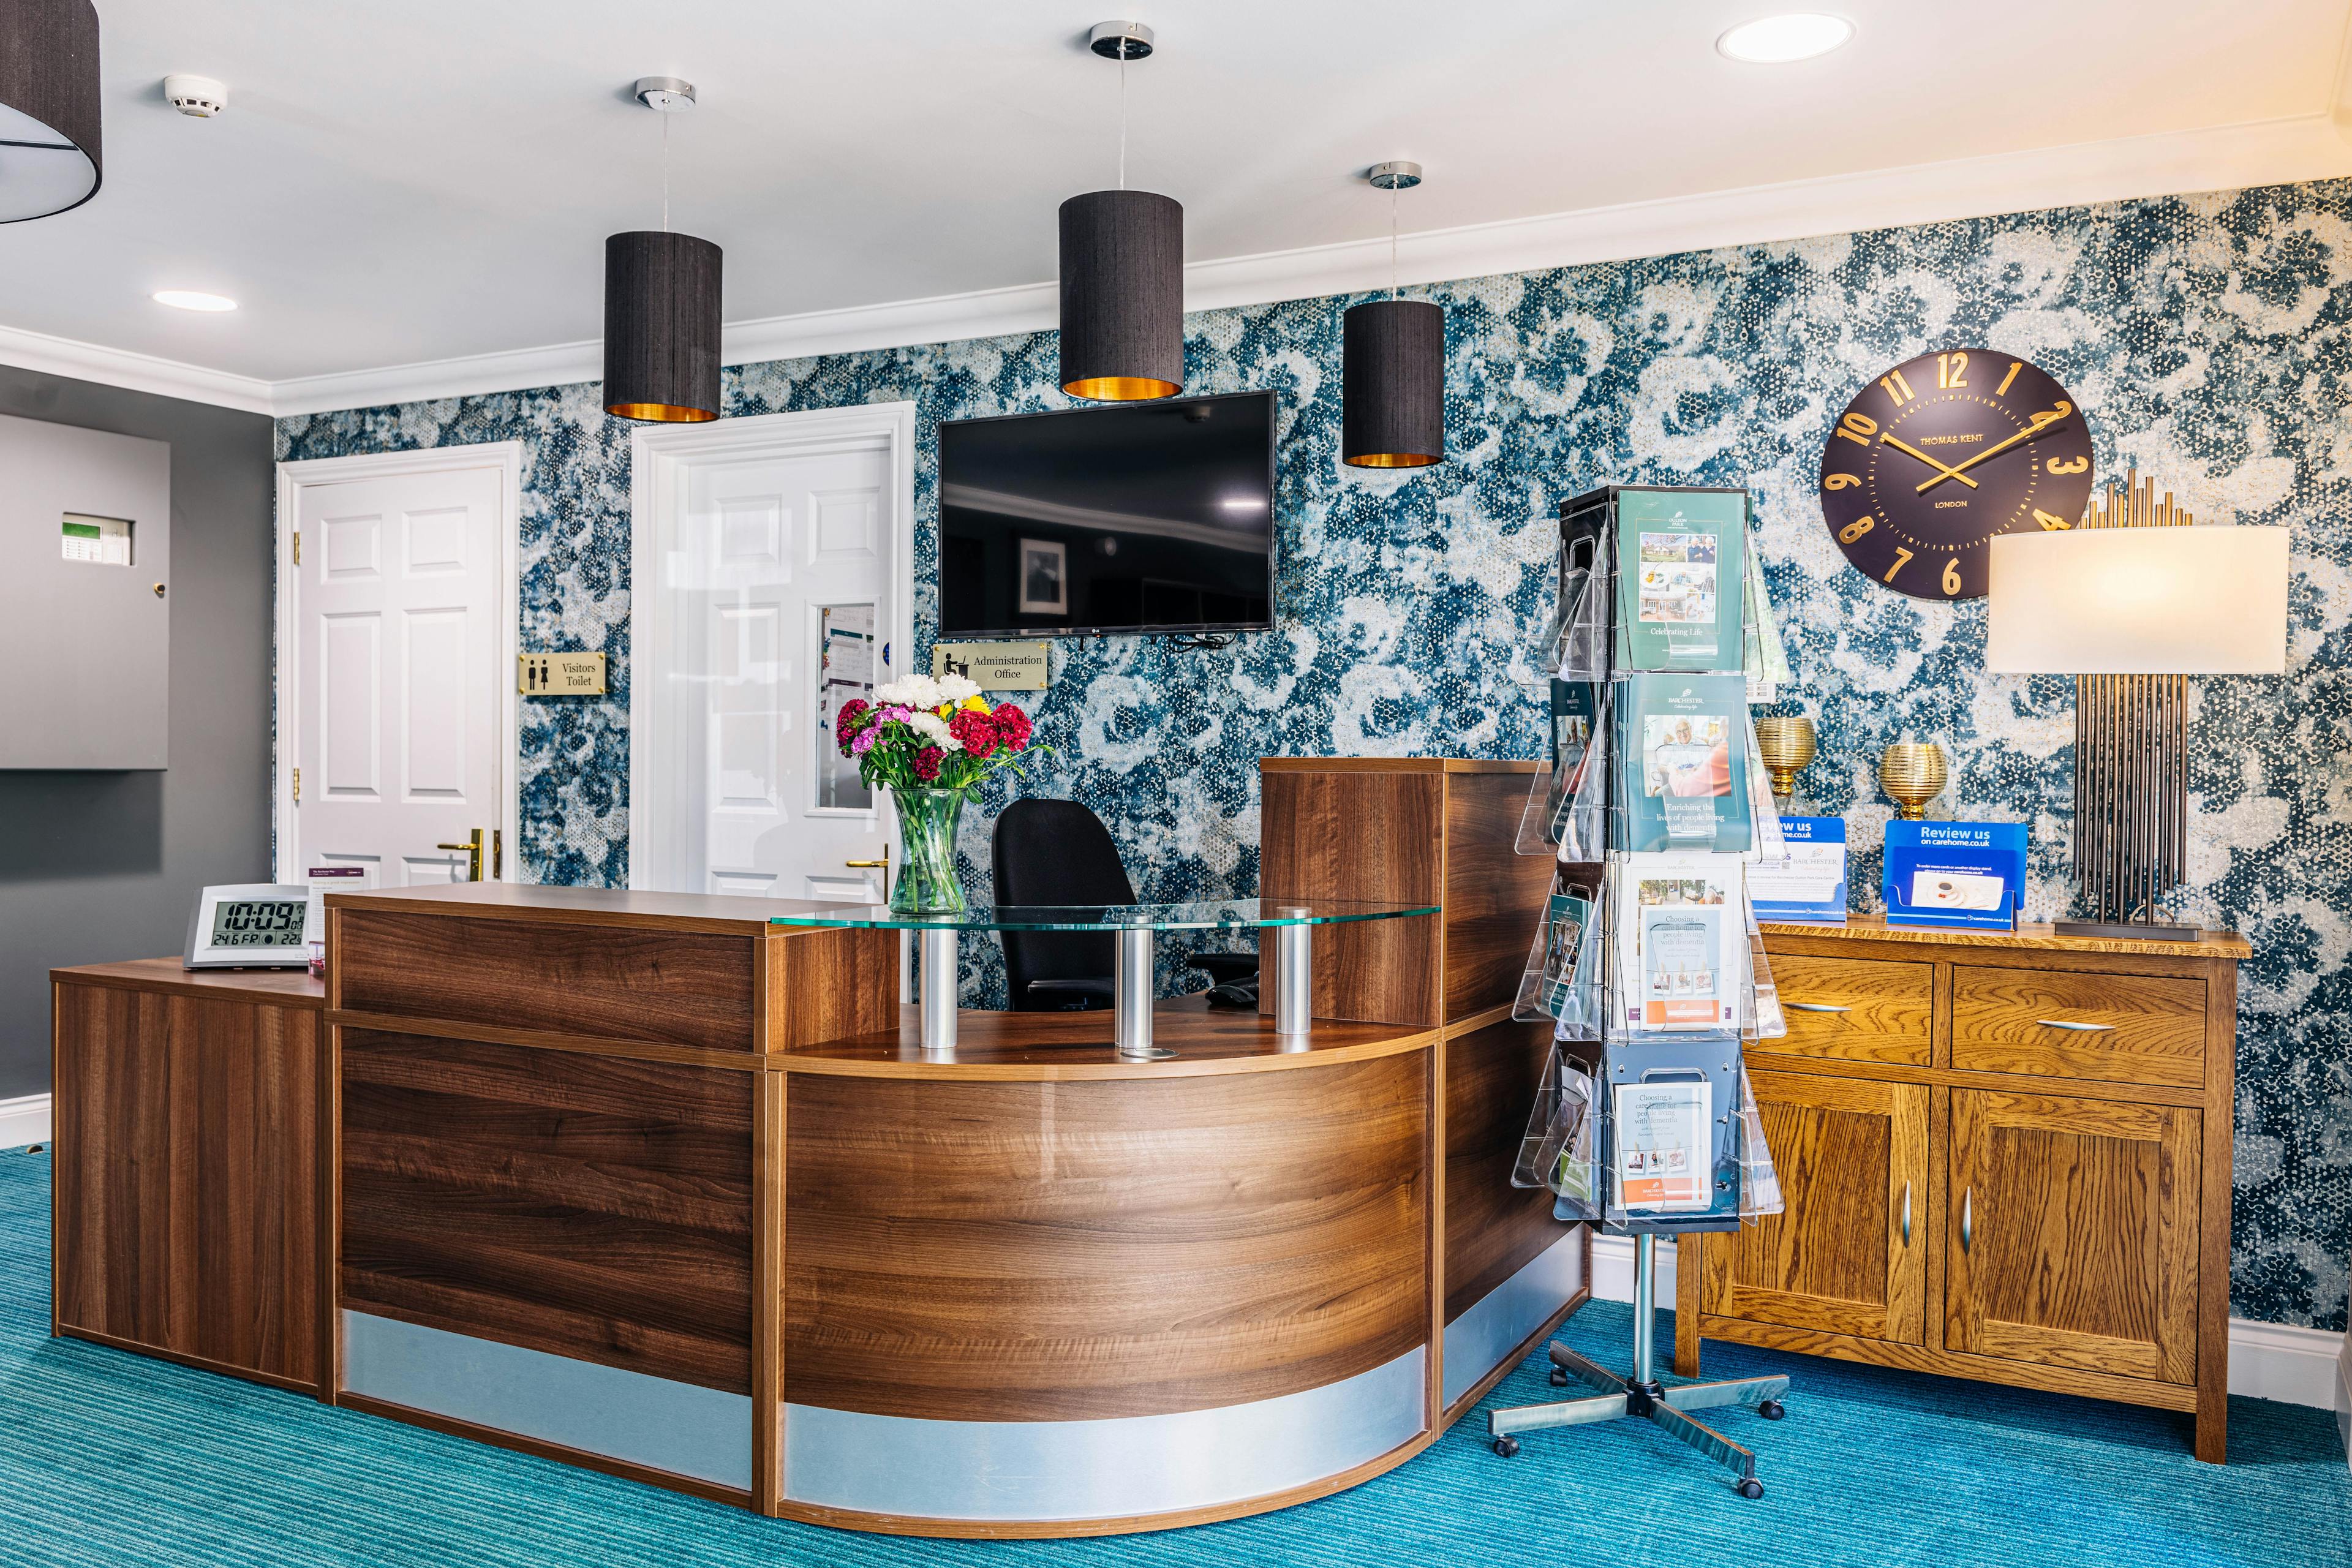 Reception in Oulton Park Care Home in Lowestoft, Suffolk